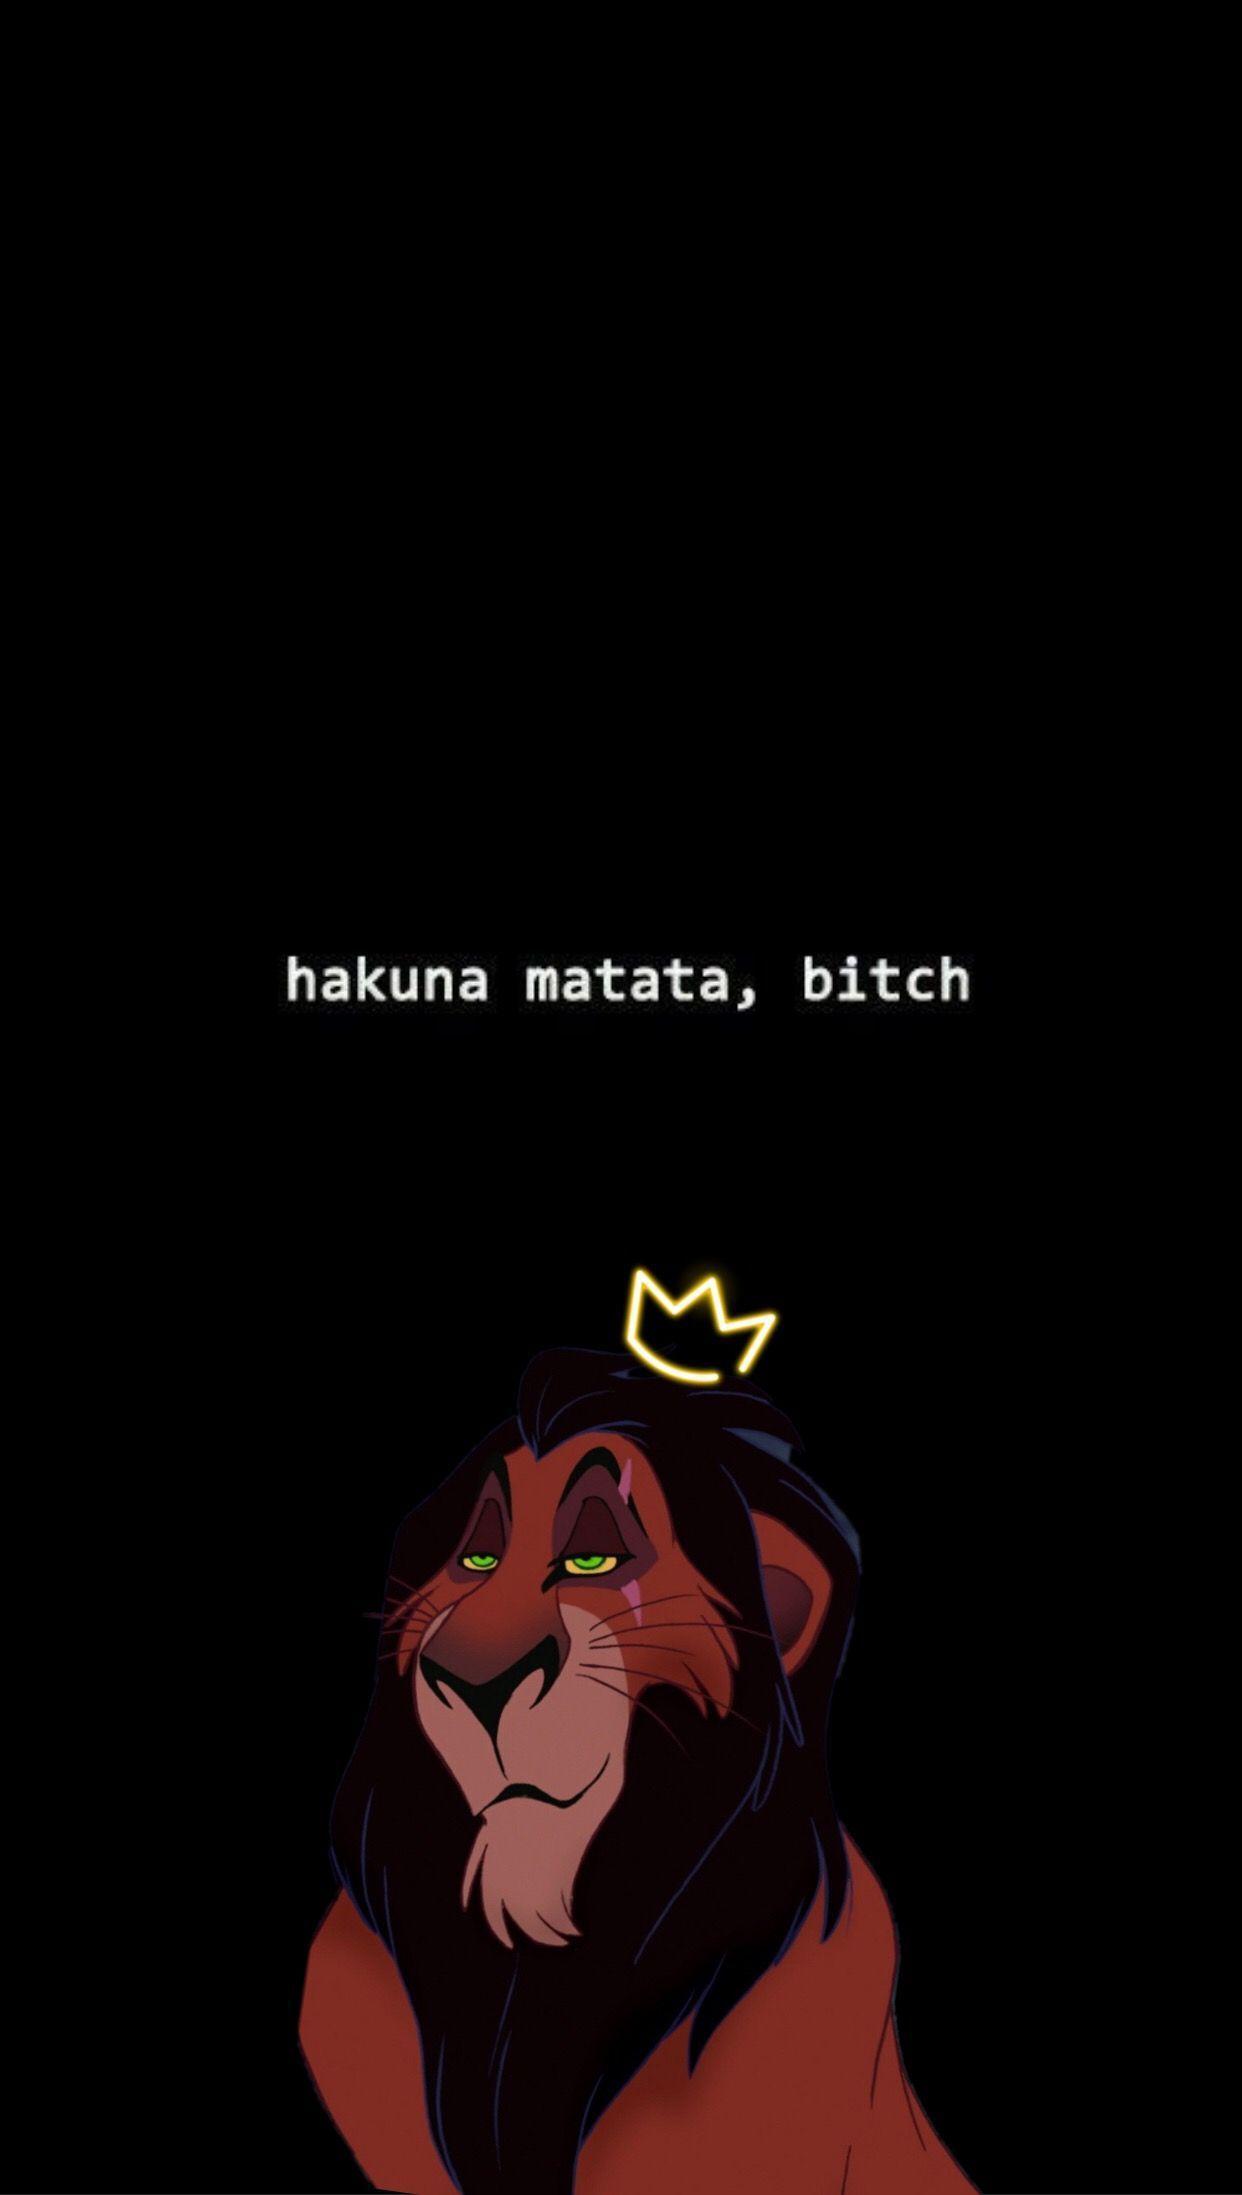 The lion king with a crown on his head - The Lion King, lion